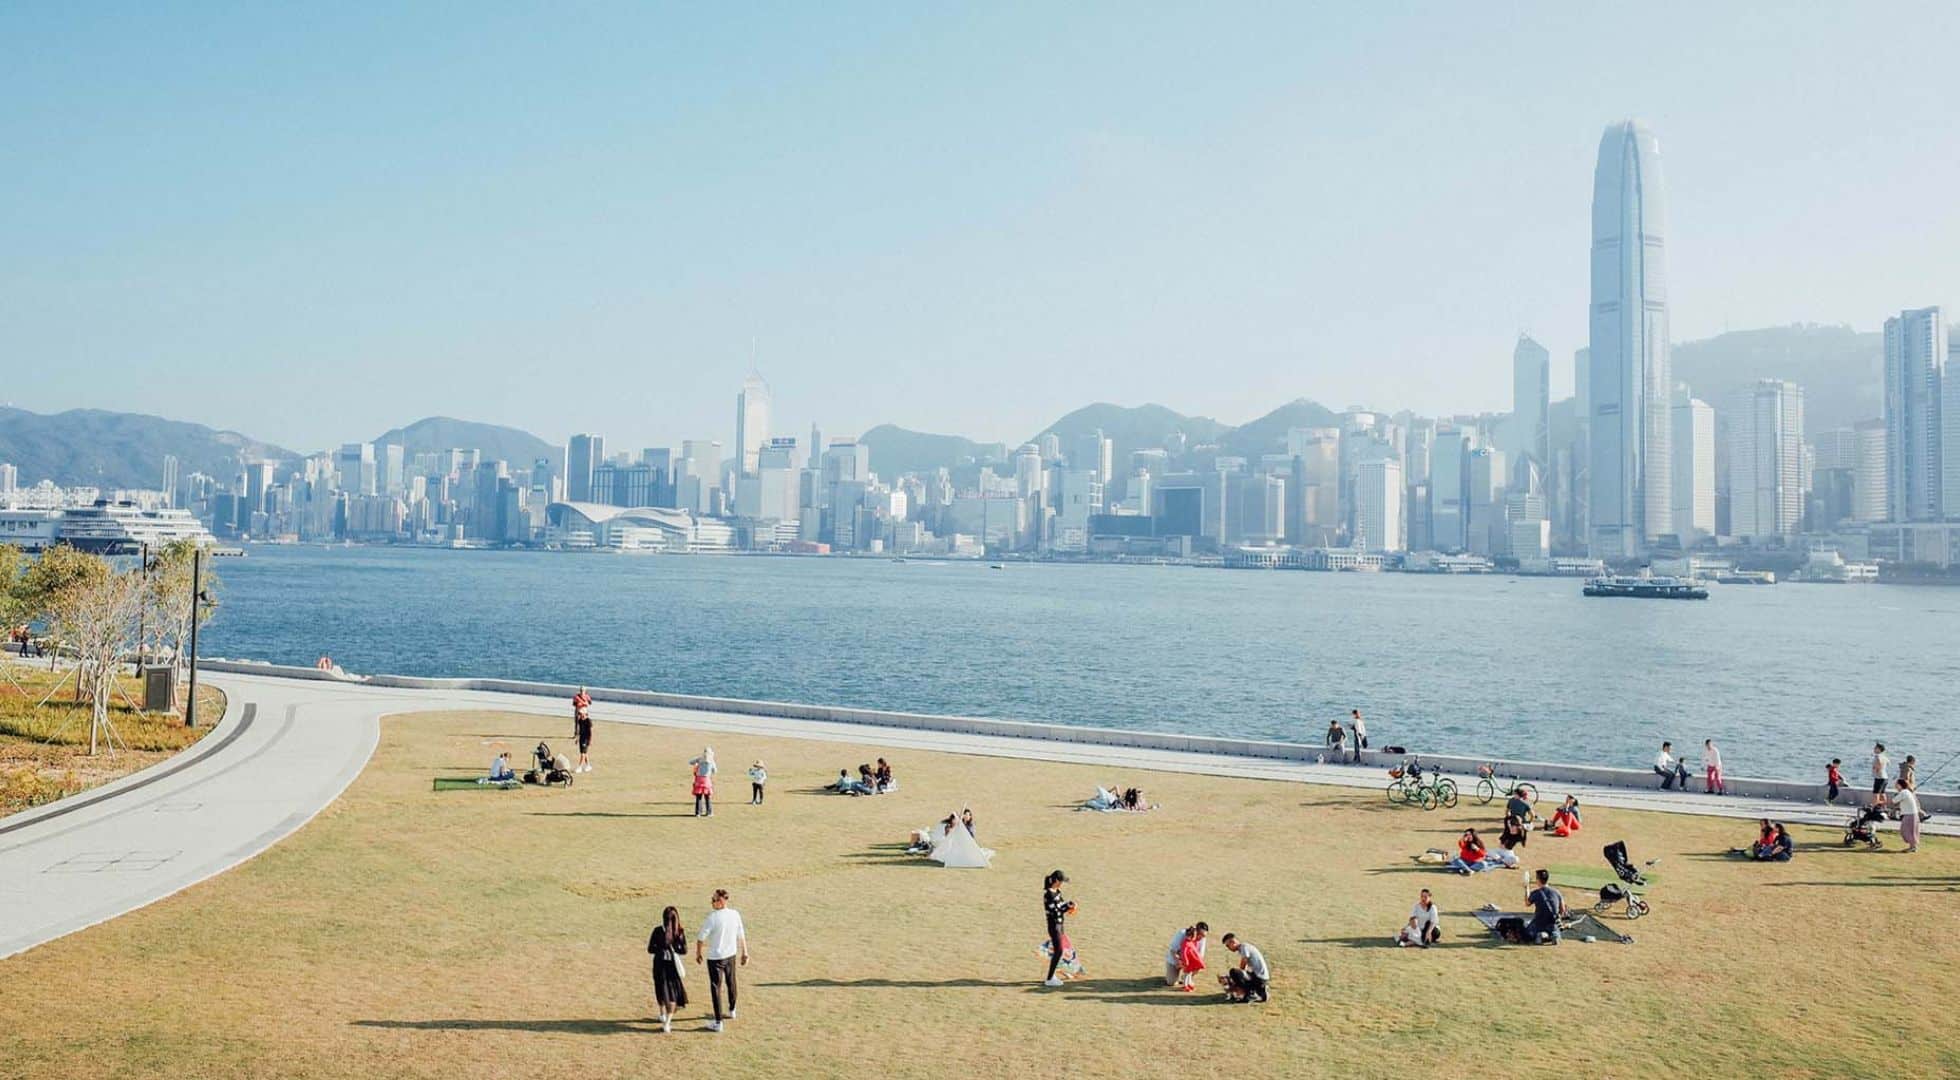 Hong Kong has relaxed entry rules for tour groups